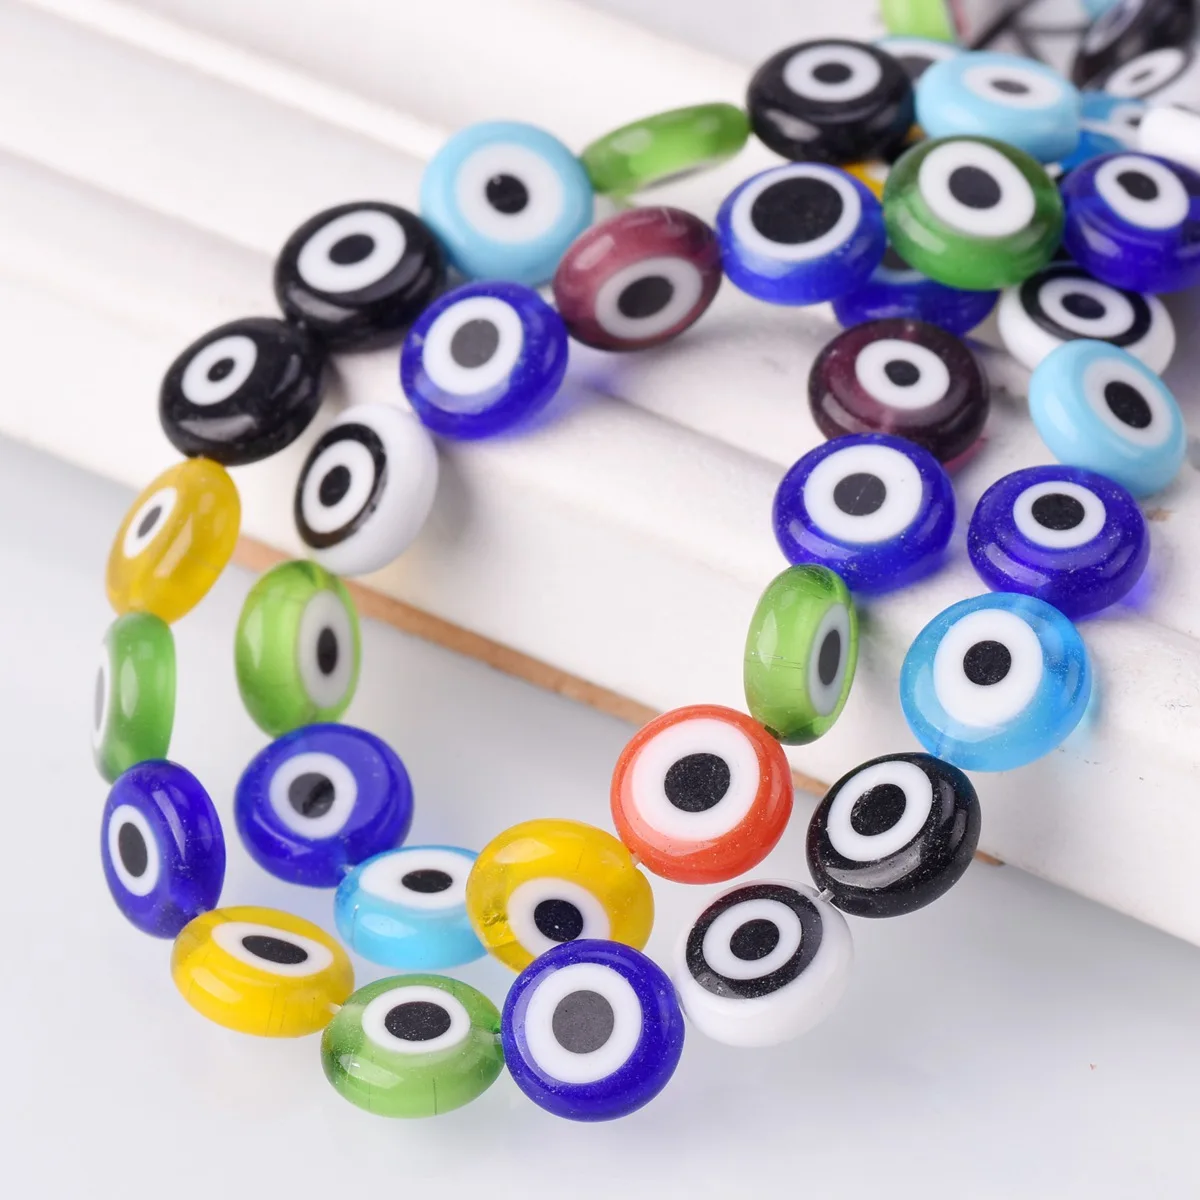 6mm 8mm 10mm 12mm Mixed Flat Round Evil Eye Millefiori Lampwork Glass Beads For Jewelry Making DIY Crafts Findings round 6mm 8mm 10mm 12mm 14mm mixed flower patterns millefiori glass loose beads lot for jewelry making diy crafts findings